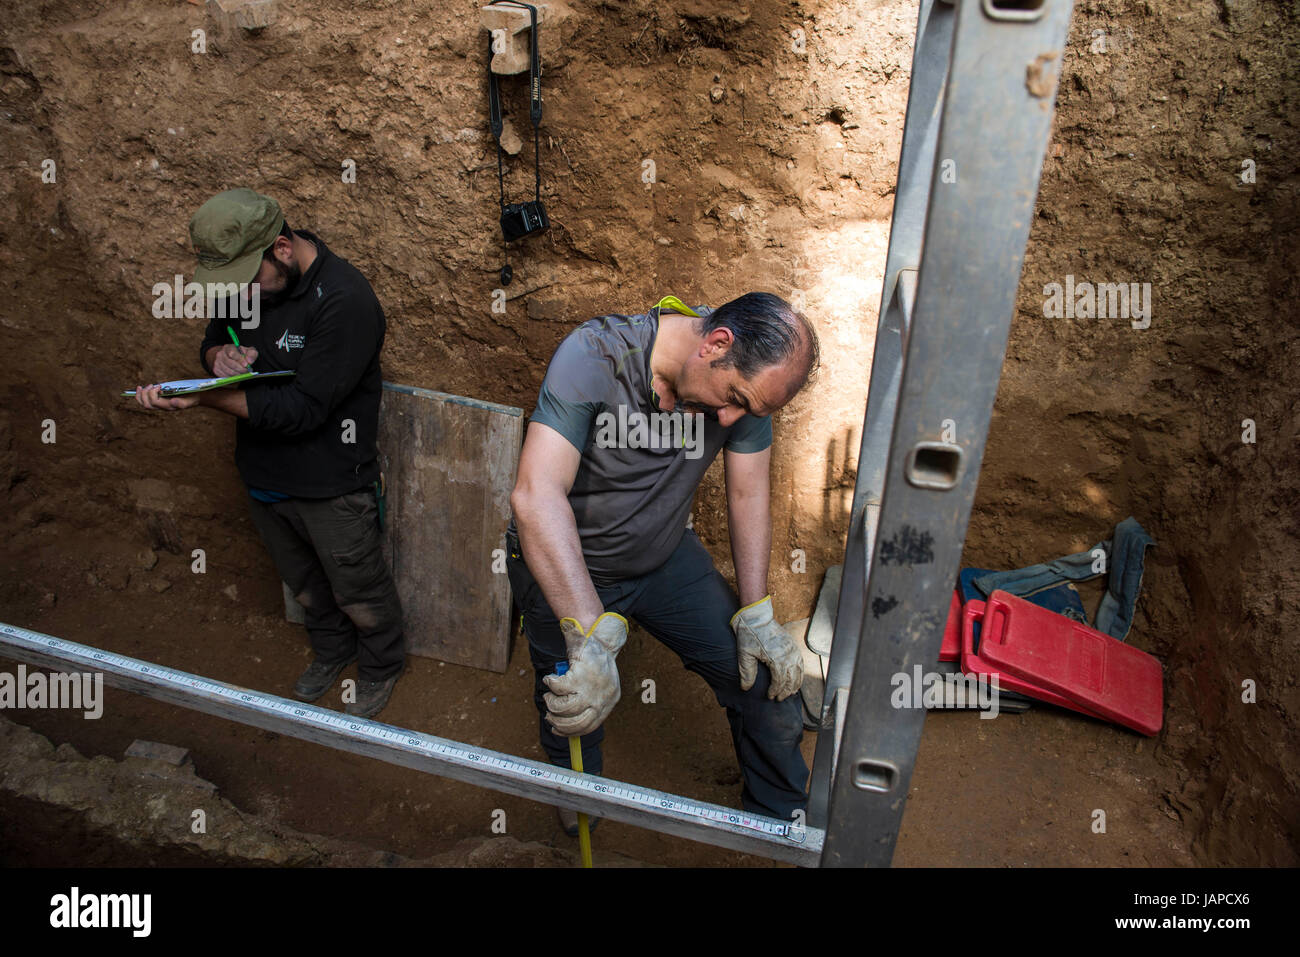 Guadalajara, Spain. 16th May, 2017. Juan Carlos Garcia Barreda and Rene Pacheco working inside the nass grave number 1 in May 2017. Timoteo Mendieta Alcala was executed against Guadalajara's cemetery wall on 16 November 1939 - one of an estimated 822 executions carried out at the cemetery from 1939 to 1944. The father-of-seven had been the local leader of the socialist UGT union in the village of Sacedon, where he had worked as a butcher. During the Franco era, his family did not dare ask to have his remains removed from the grave in which he and 21 other men were buried. (Credit Image: © Nac Stock Photo